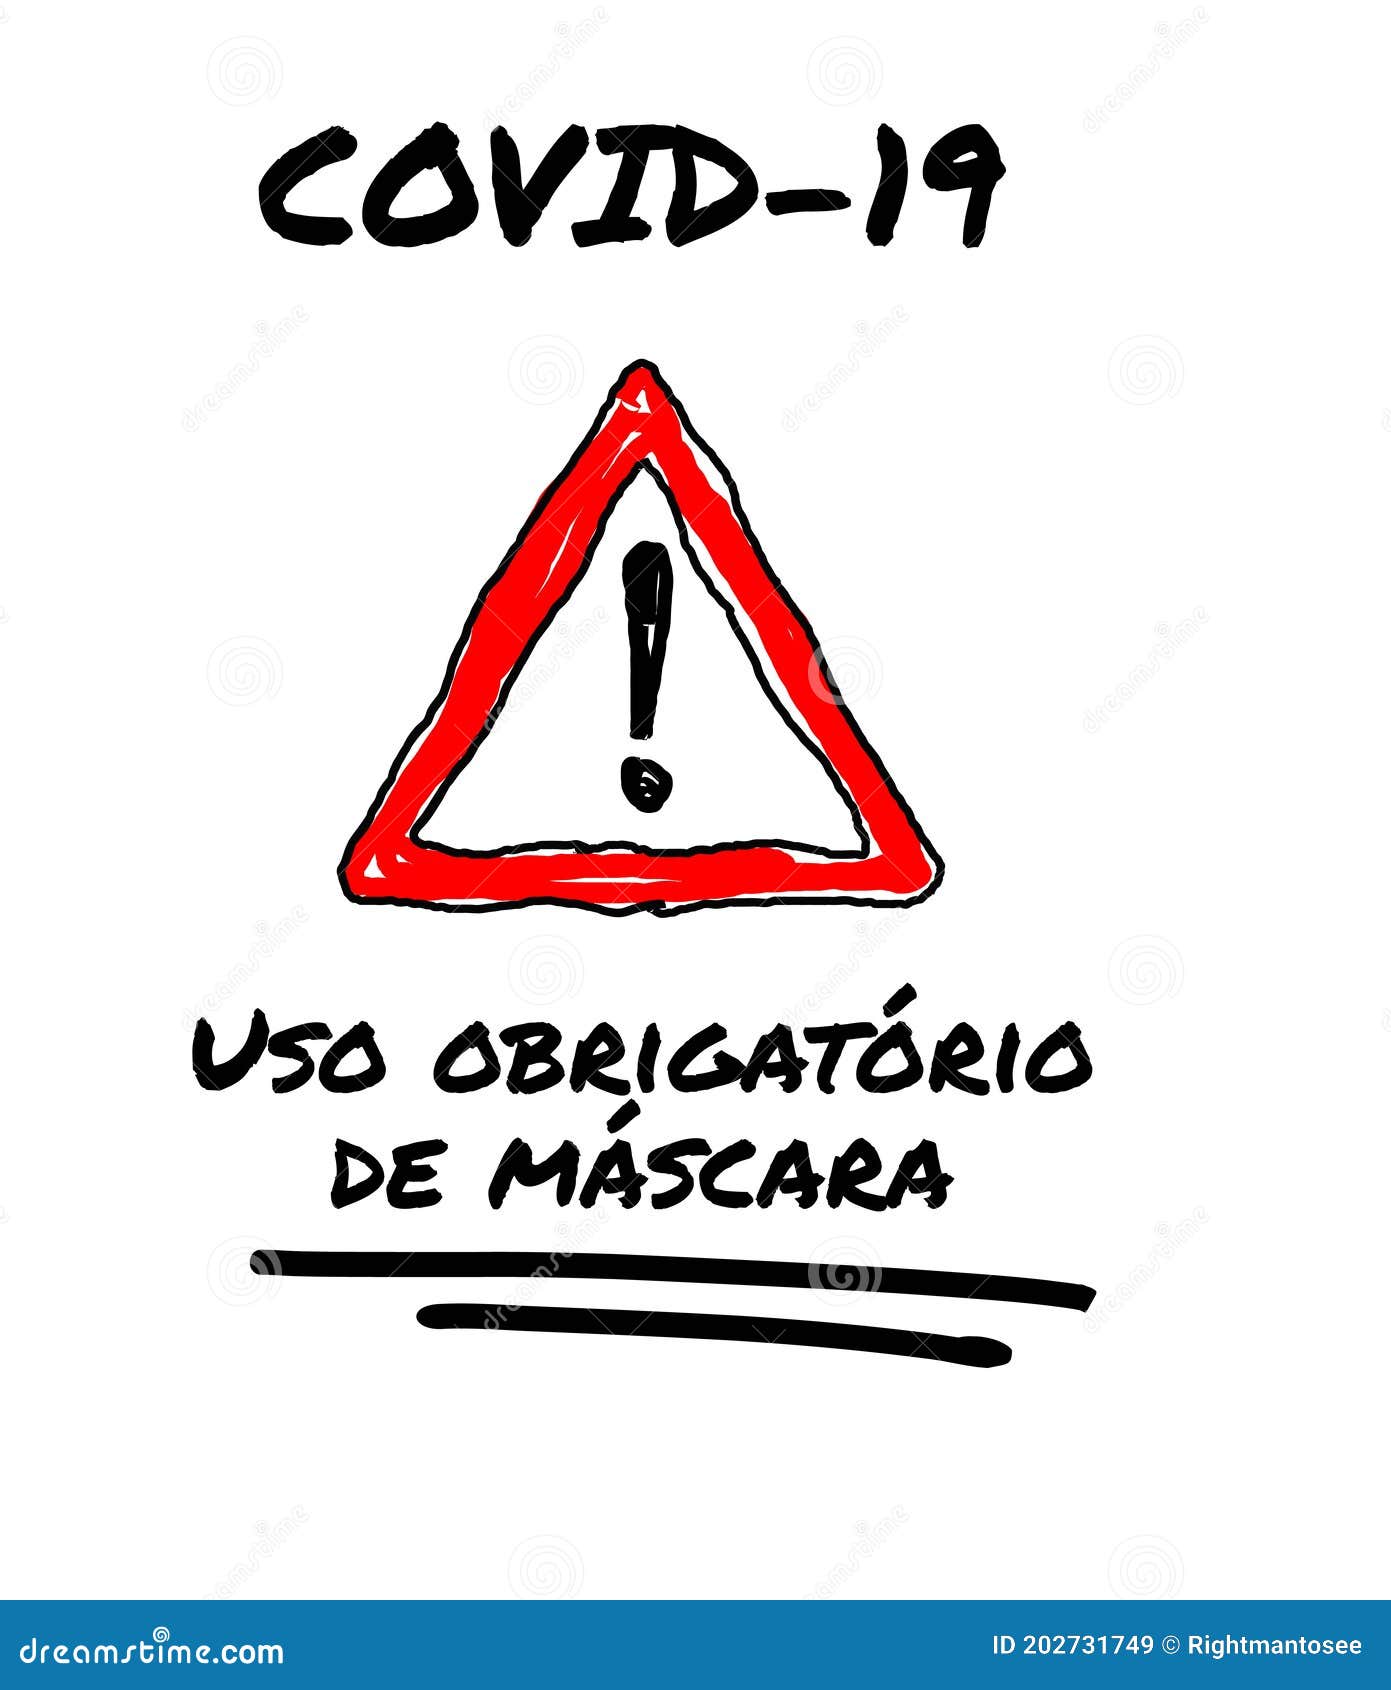 coronavirus covid-19 public poster with a red warning triangle and the text in portugese `uso obrigatÃÂ³rio de mÃÂ¡scara`